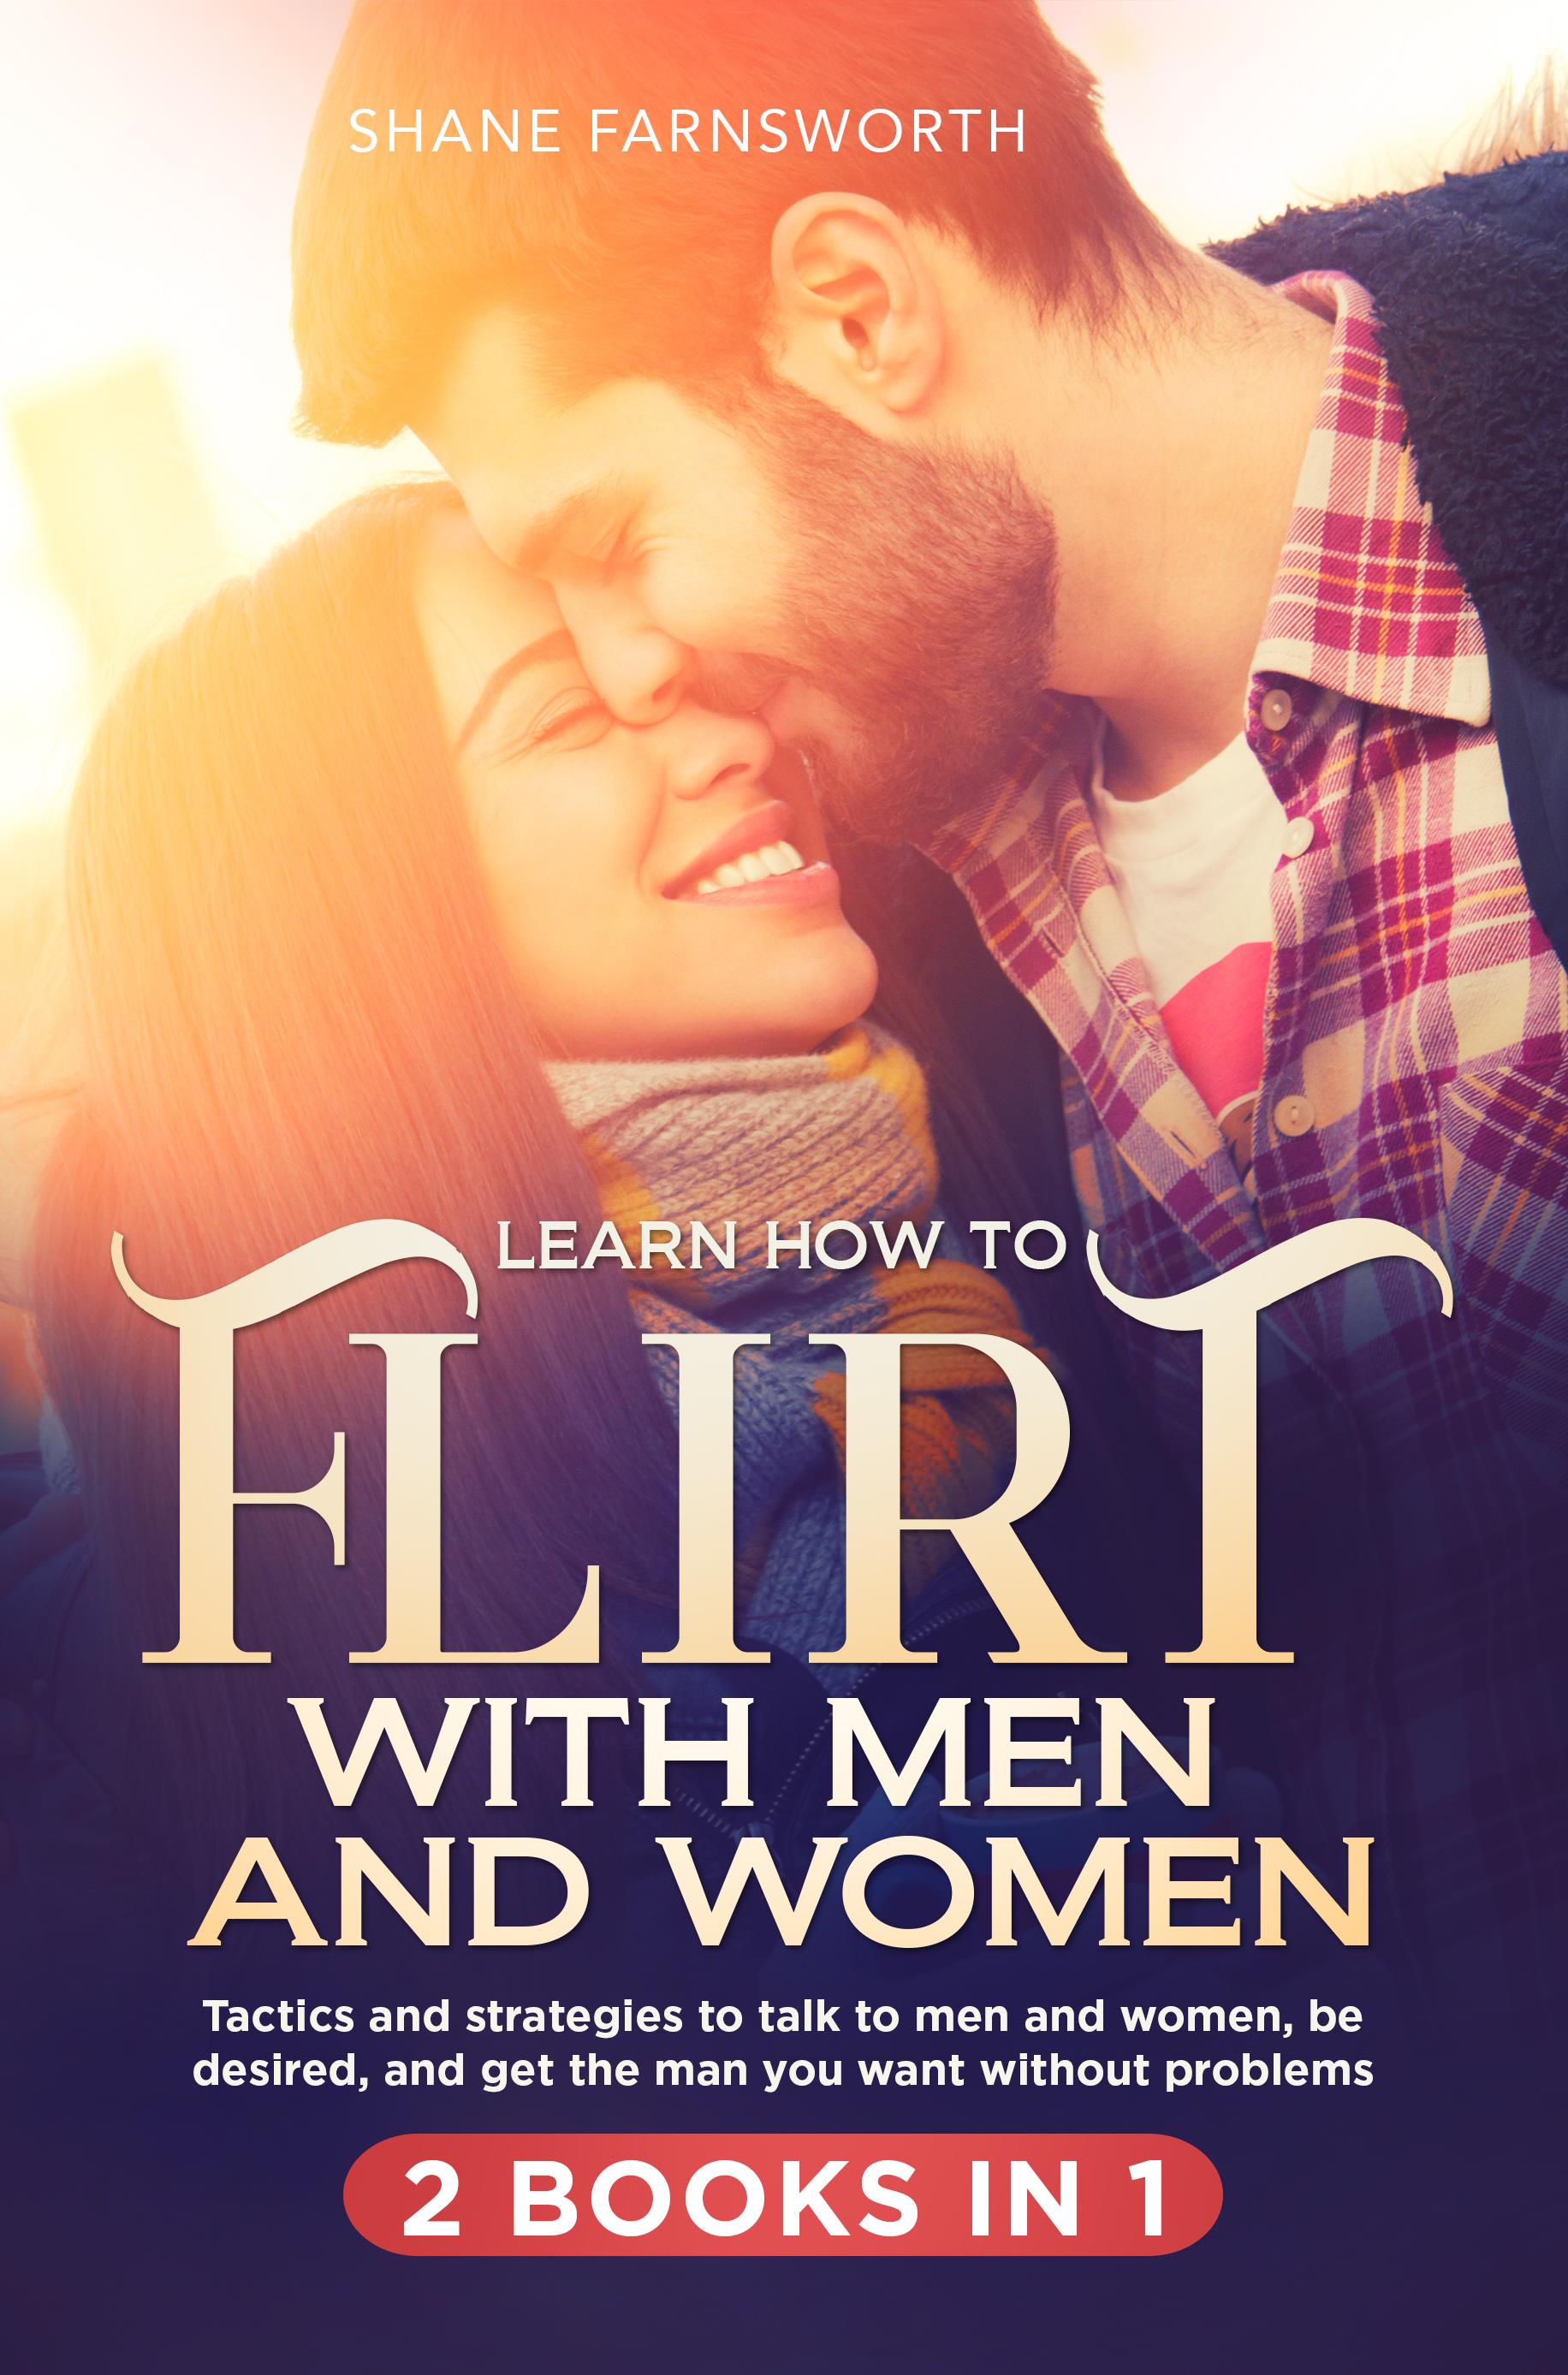 Learn how to flirt with men and women (2 books in 1).Tactics and strategies to talk to men and women, be desired, and get the man you want without problems.